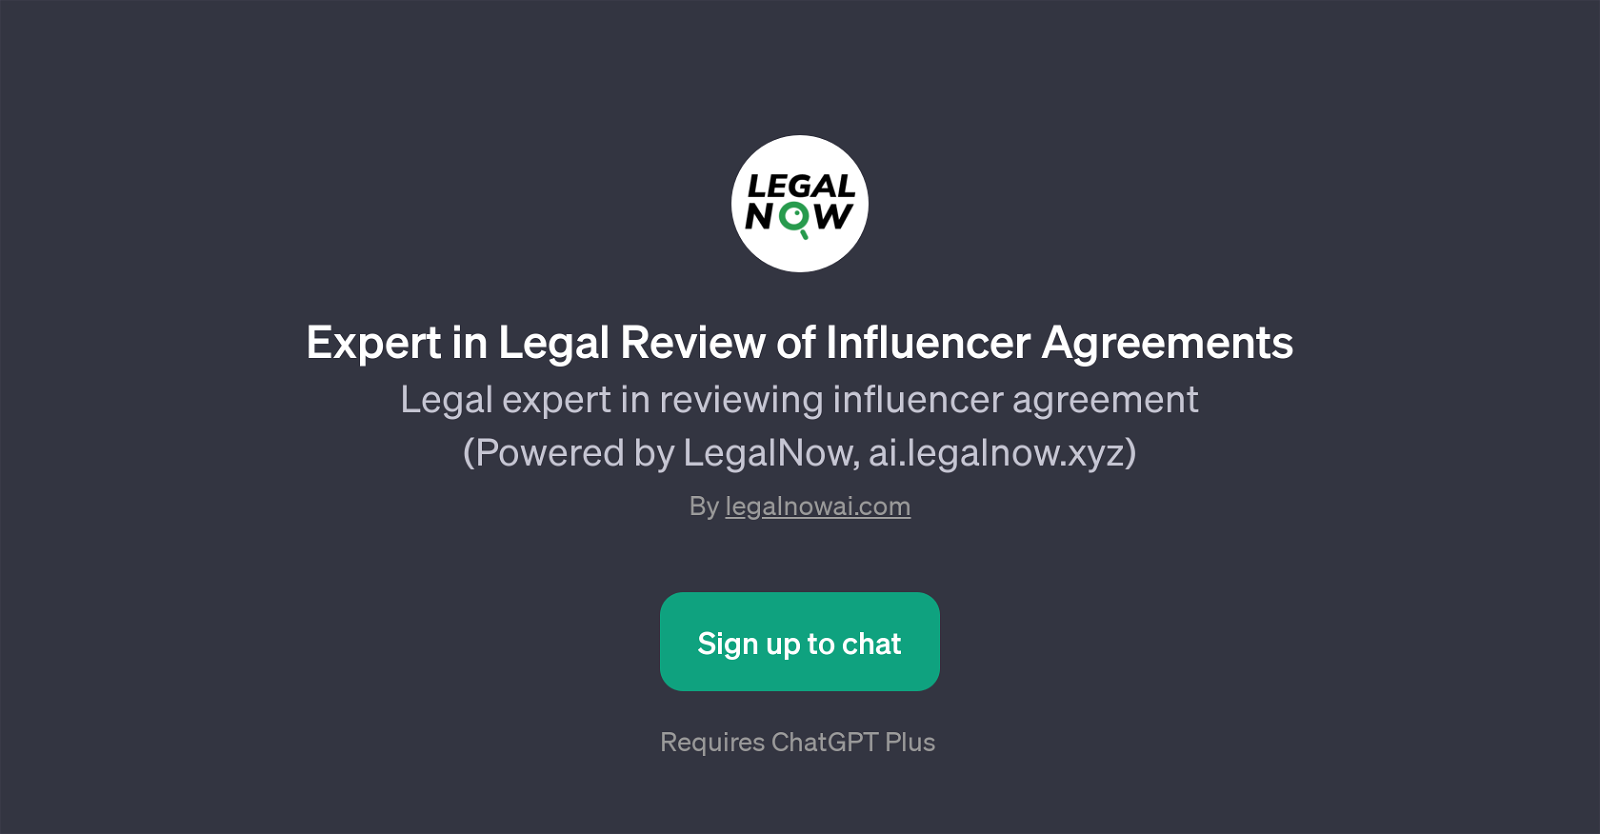 Expert in Legal Review of Influencer Agreements website